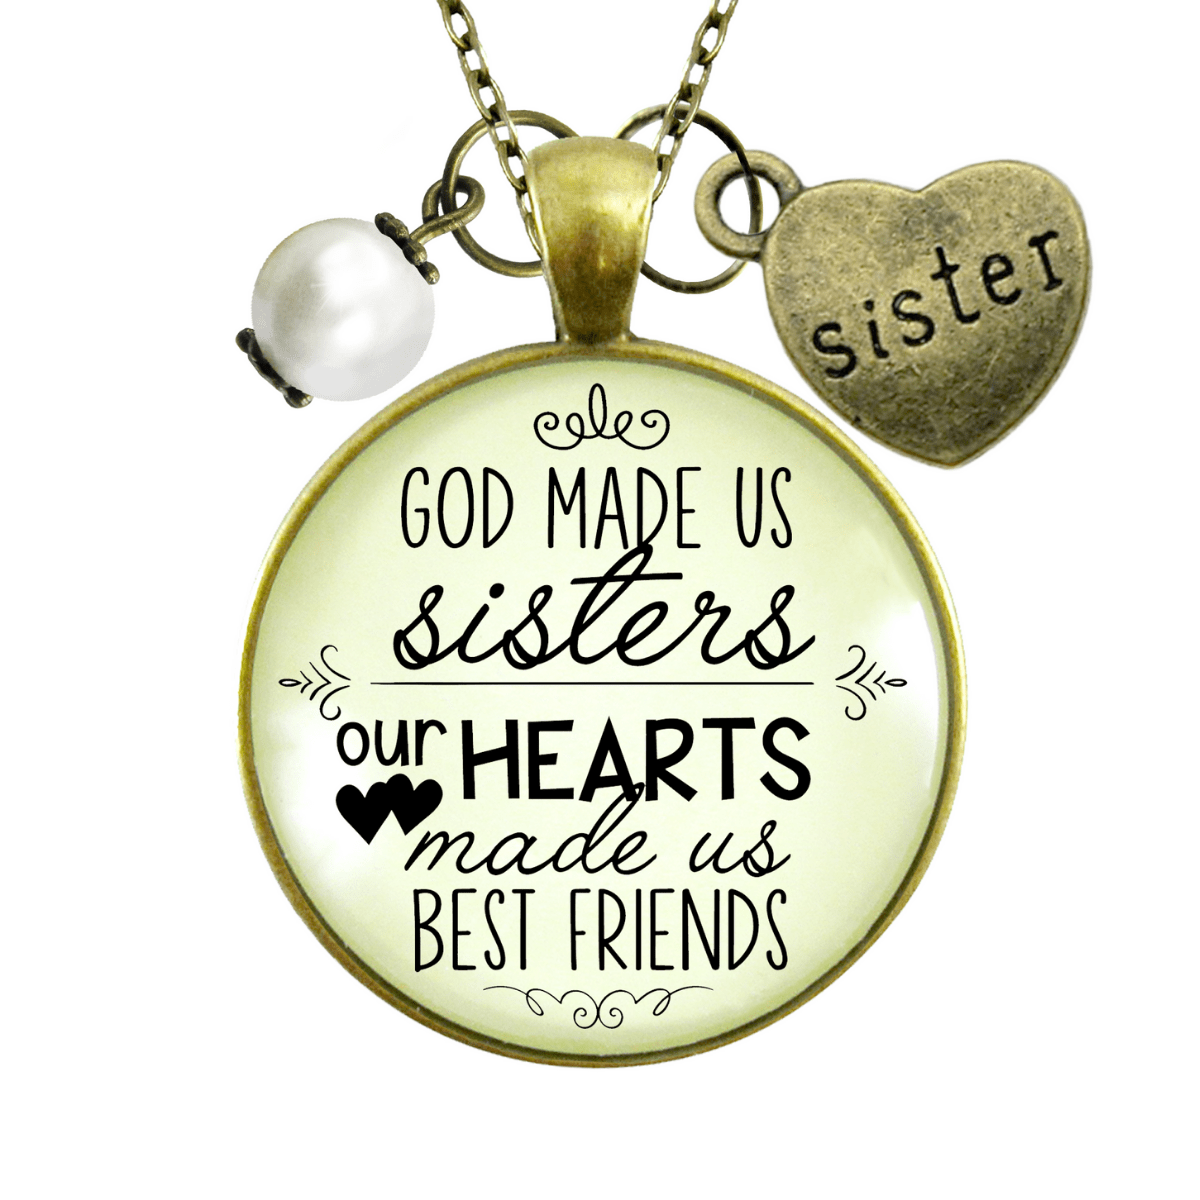 Gutsy Goodness Sisters Necklace God Made Us Sisters Best Friends Faith Jewelry Gift - Gutsy Goodness Handmade Jewelry;Sisters Necklace God Made Us Sisters Best Friends Faith Jewelry Gift - Gutsy Goodness Handmade Jewelry Gifts